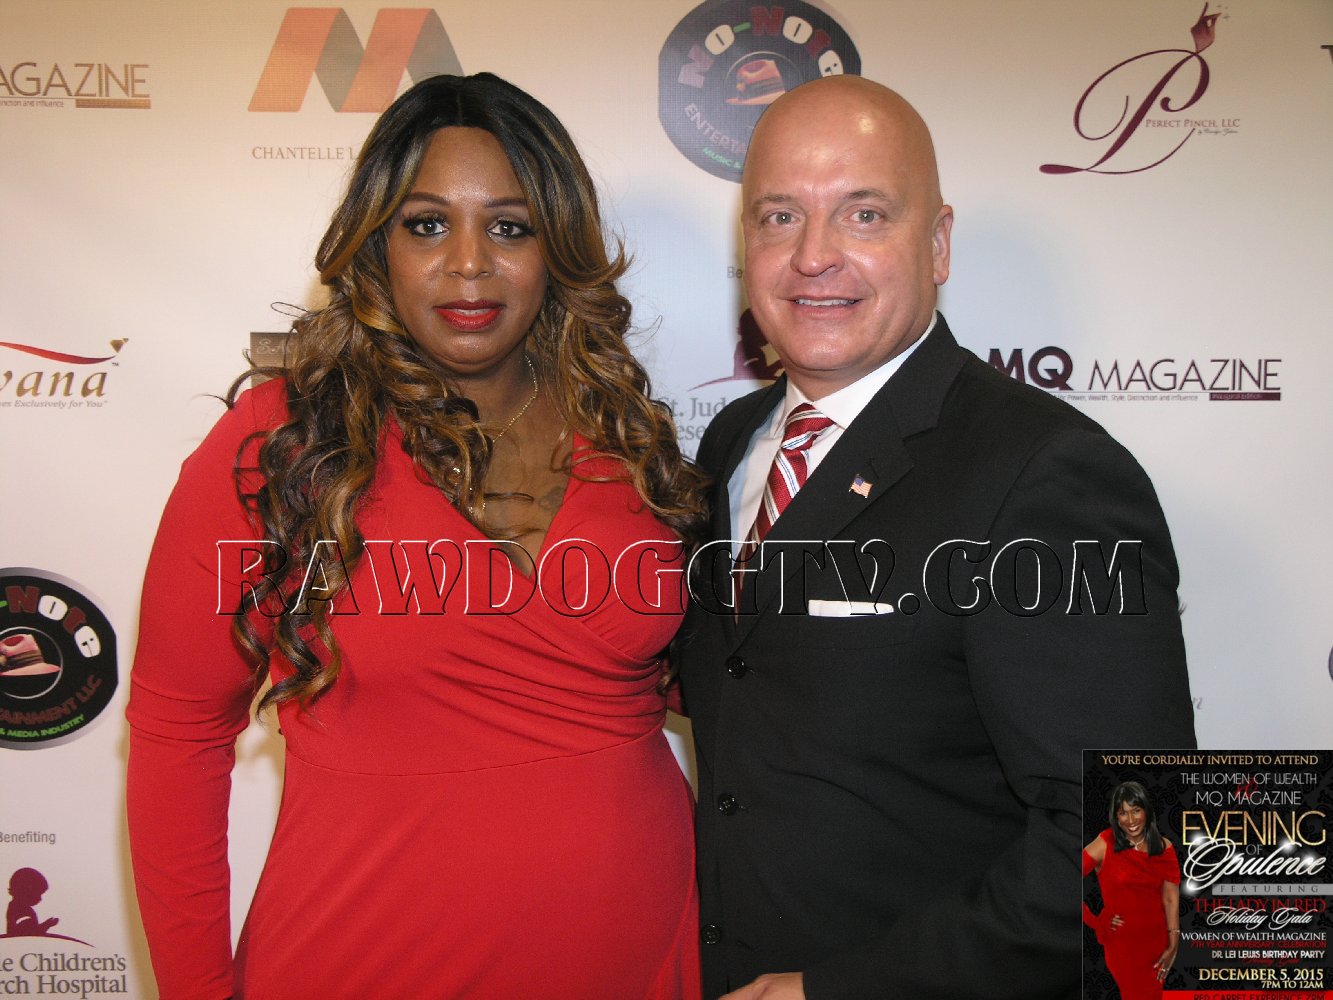 Women of Wealth Magazine Photos-St. Jude Childrens Research Hospital Toy Drive Image- Global Press Dist RAWDOGGTV 305-490-2182 (6)